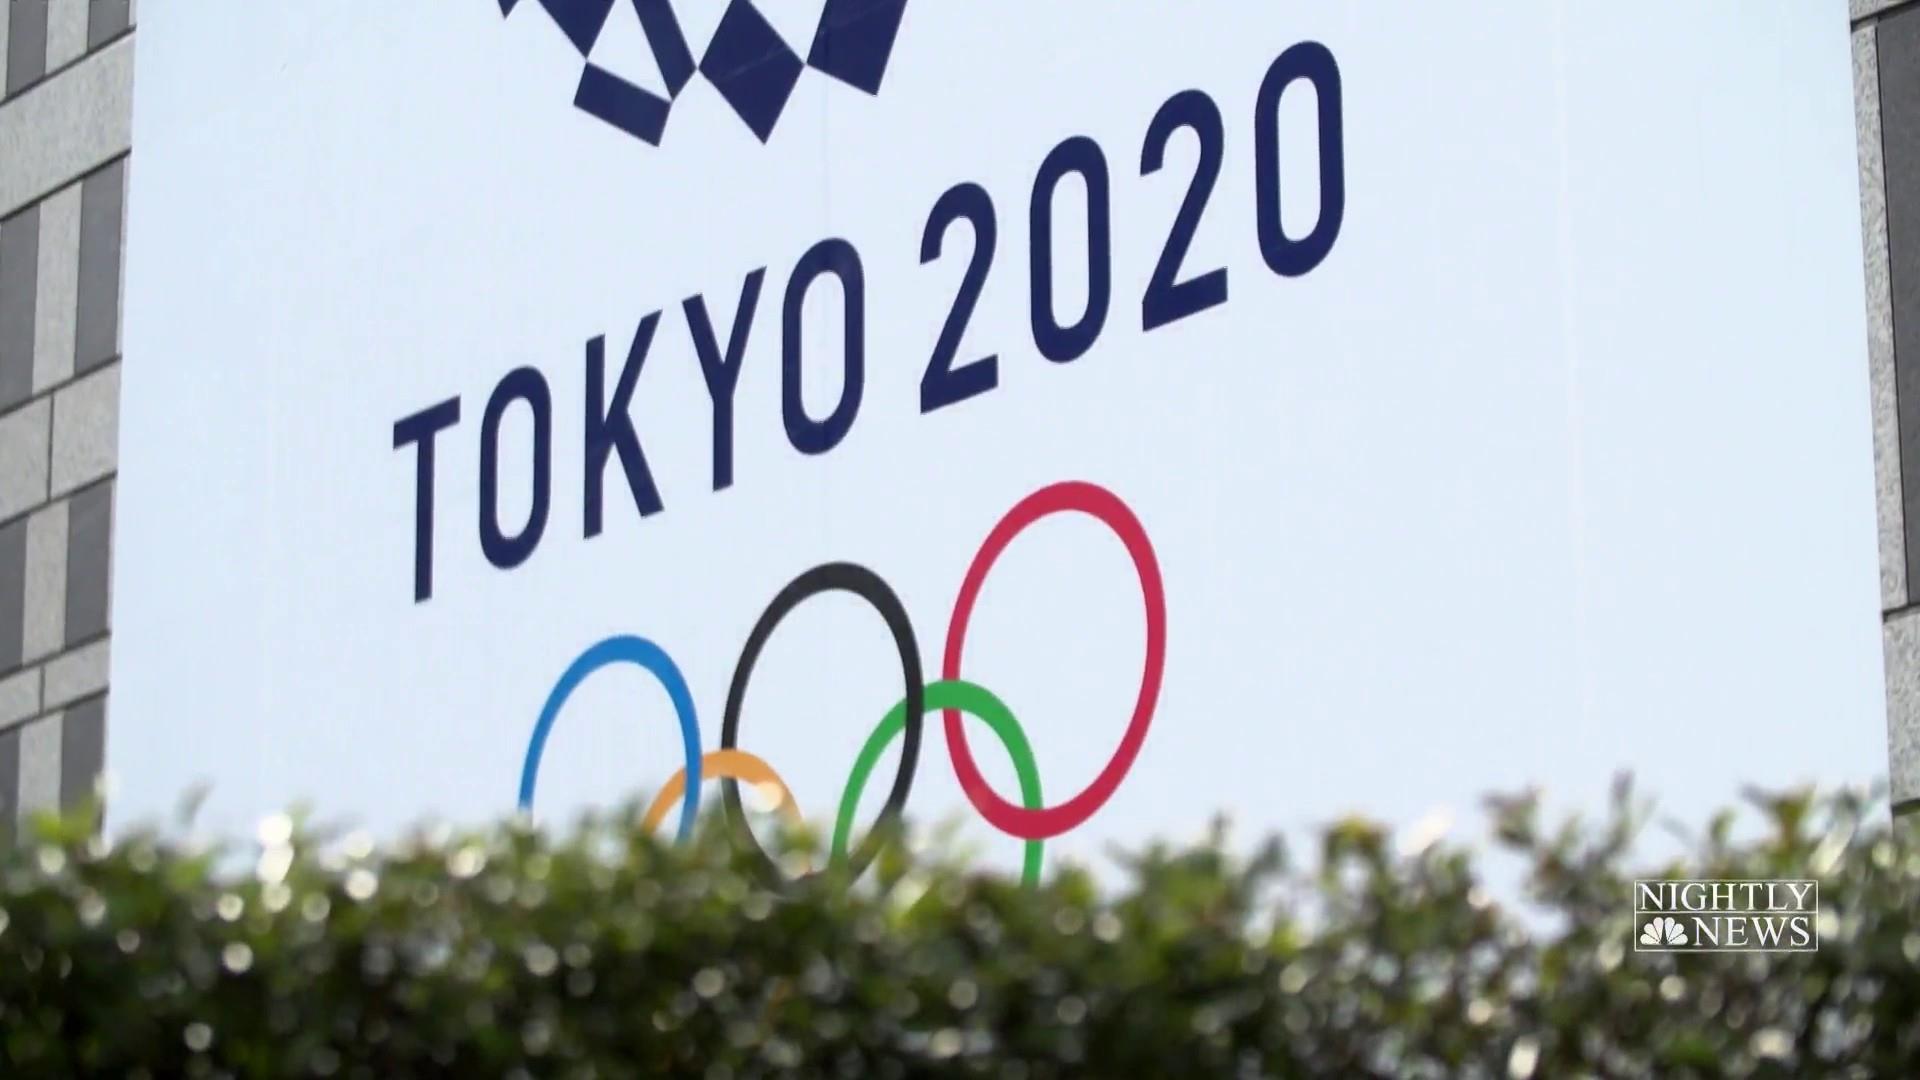 A look ahead to the 2020 Summer Olympics in Tokyo